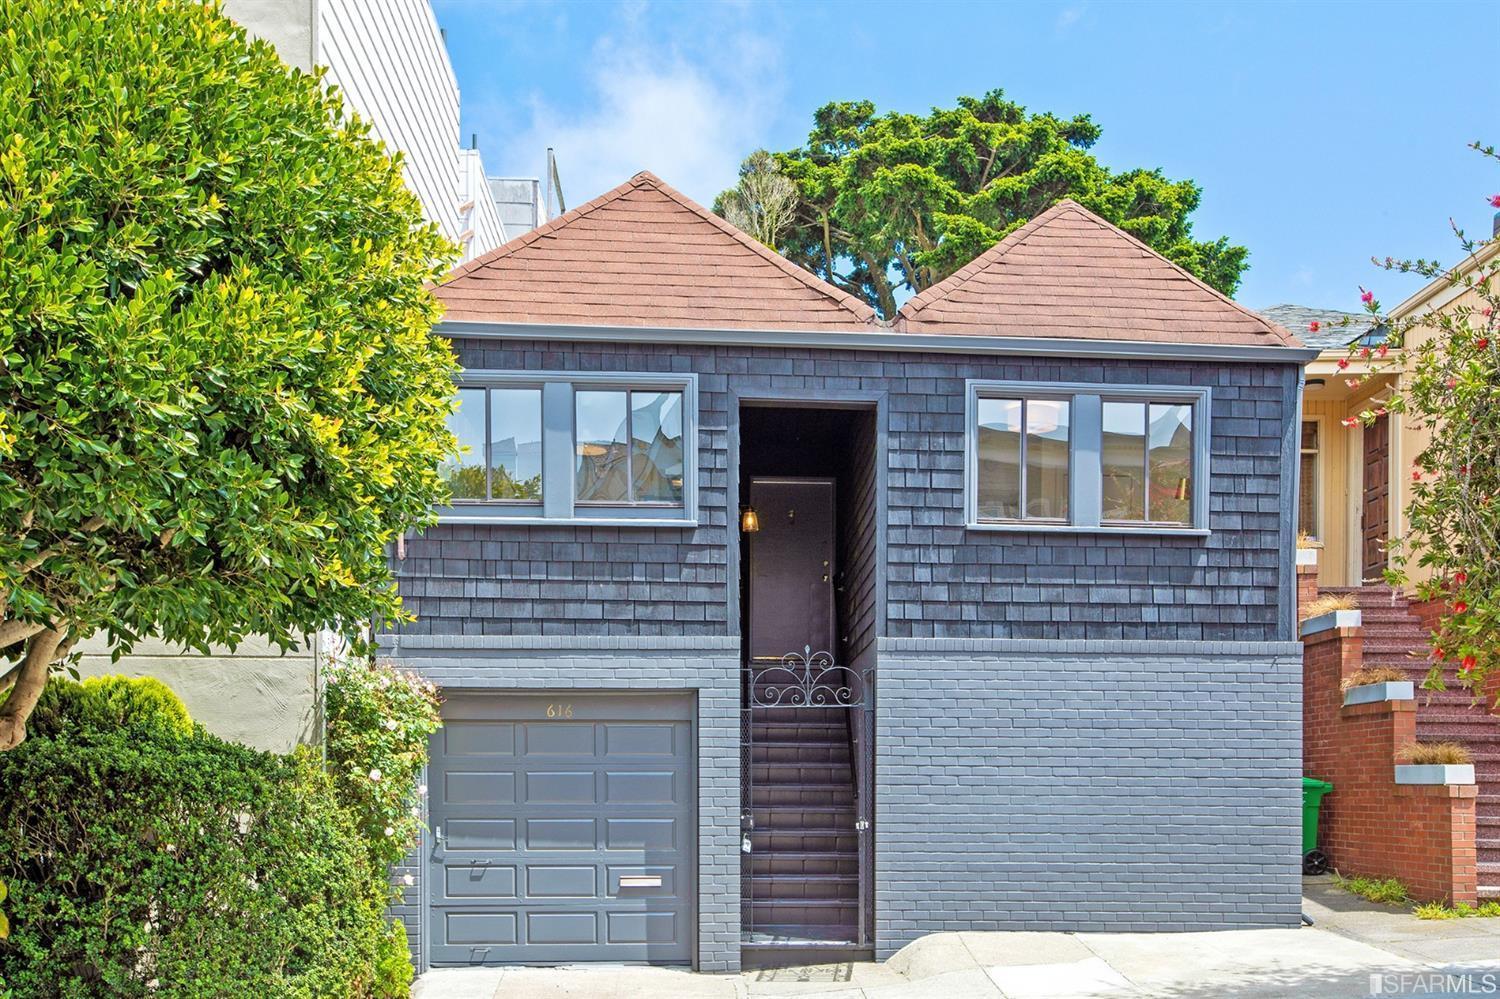 661 Belvedere In Cole Valley Strikes Gold And Claims Top Spot On Weekly Overbids | 6/14/19